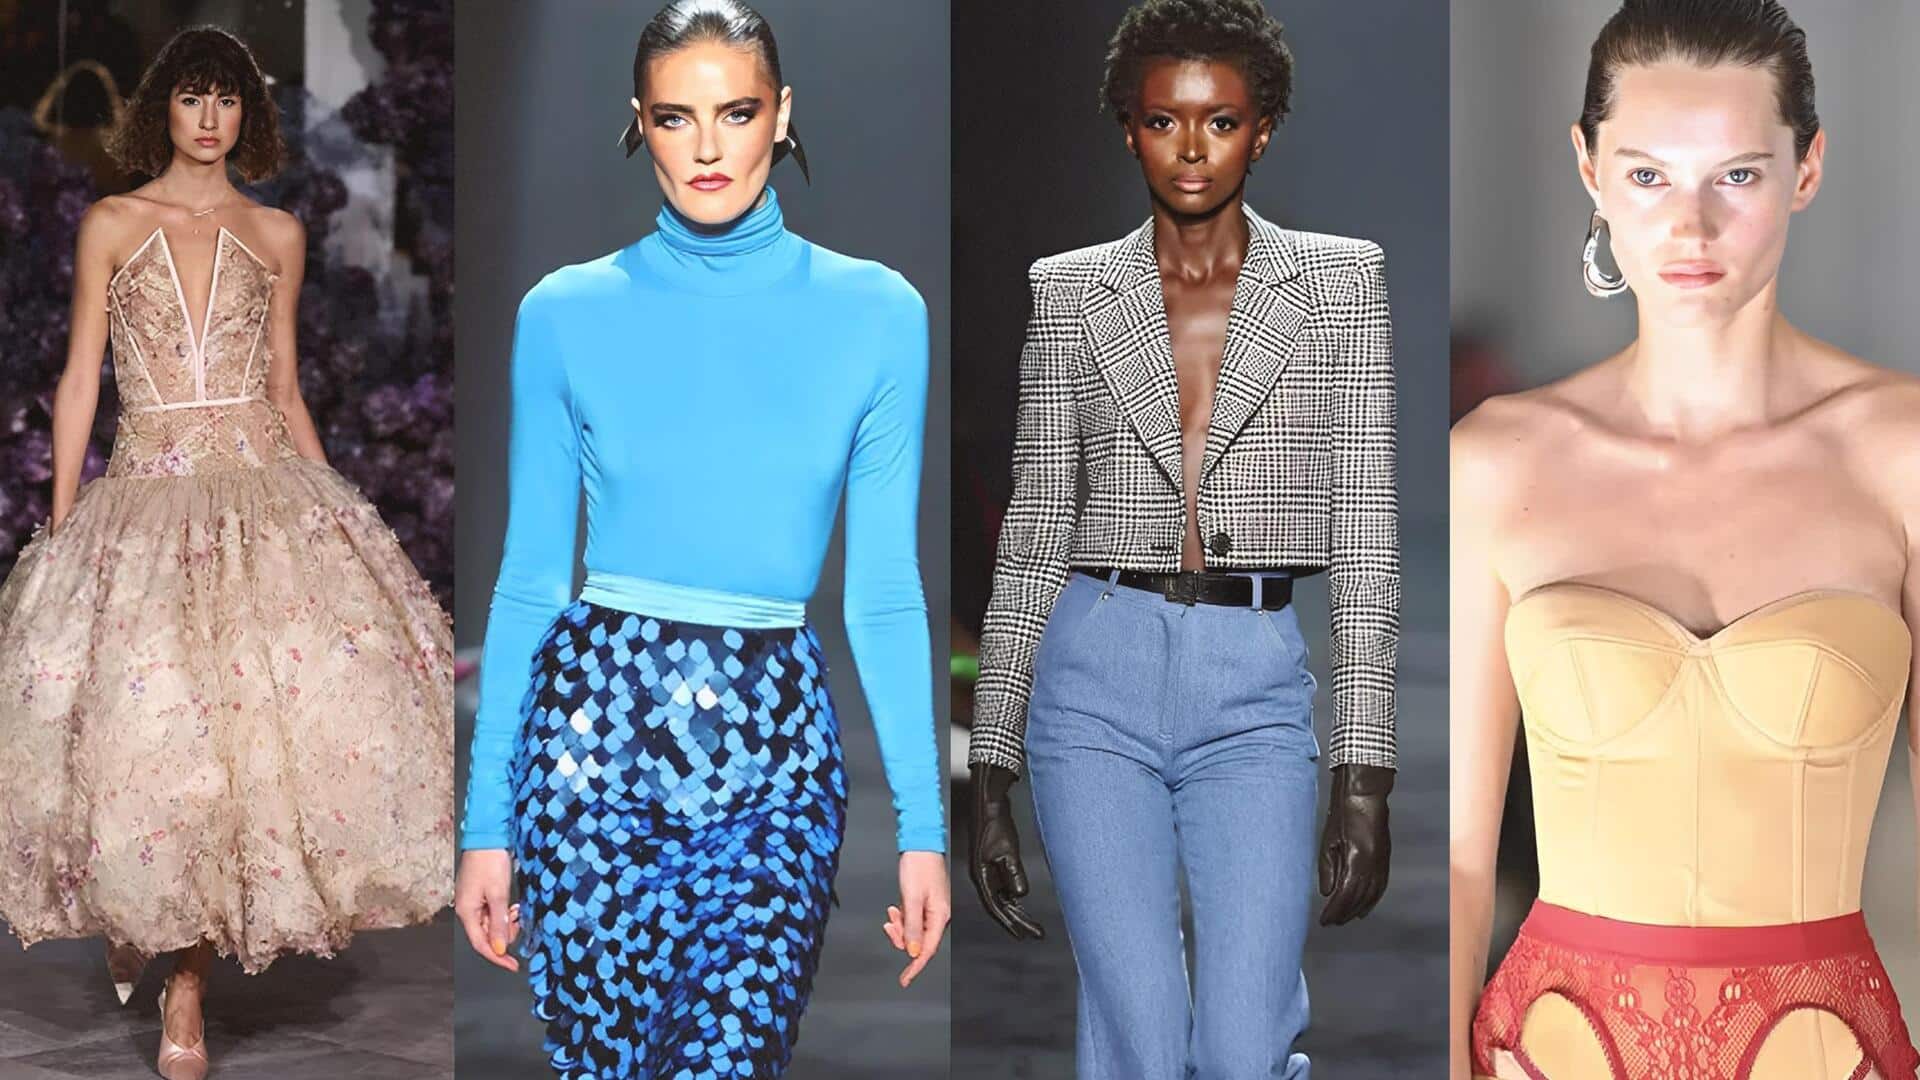 New York Fashion Week 2023: Fashion highlights from the event